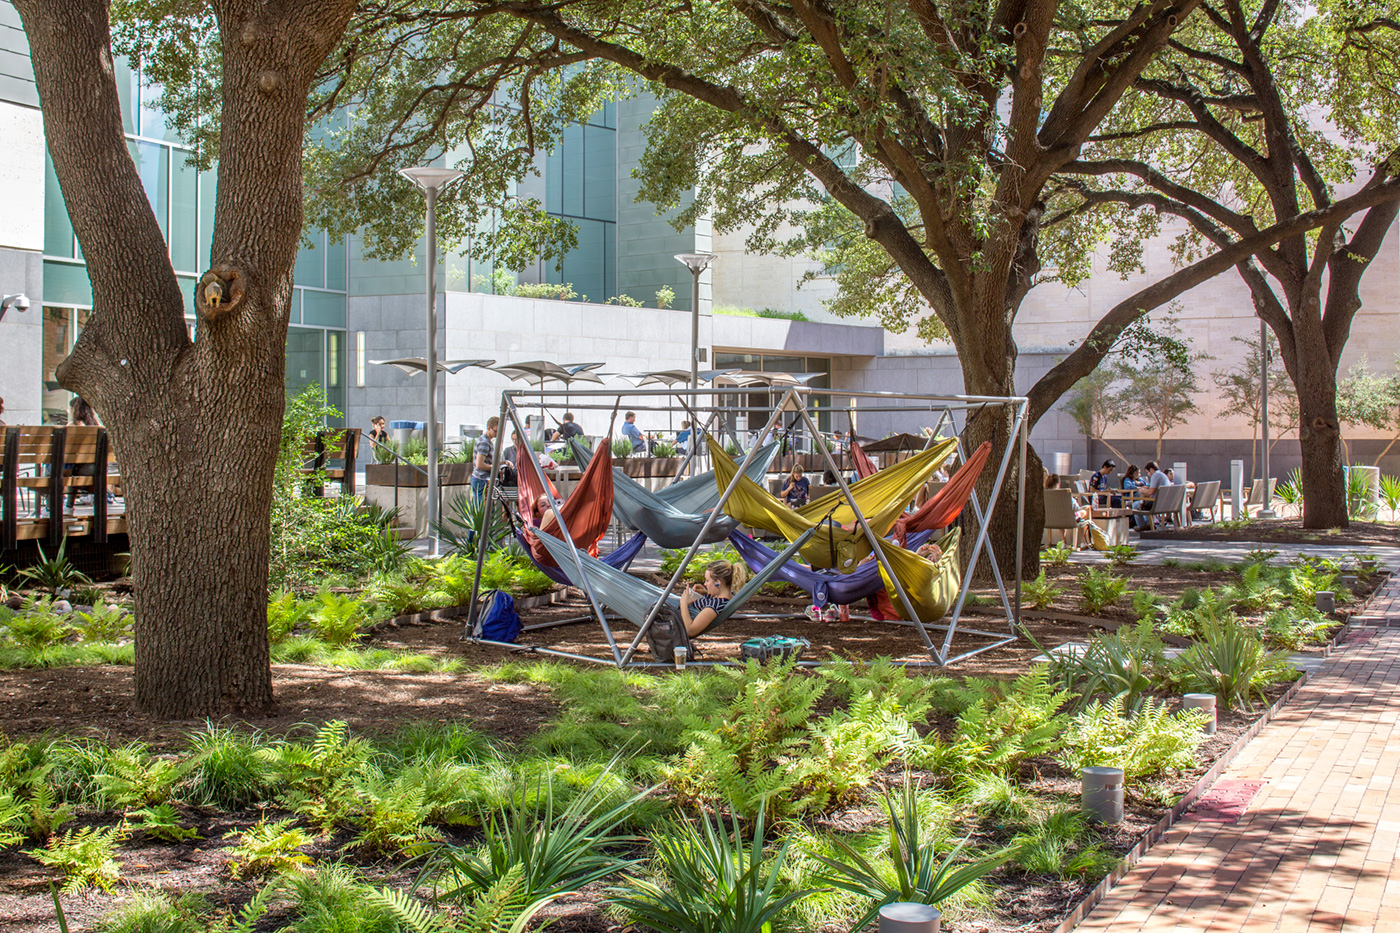 A metal structure under trees with 8 hammocks connected filled with relaxing students.